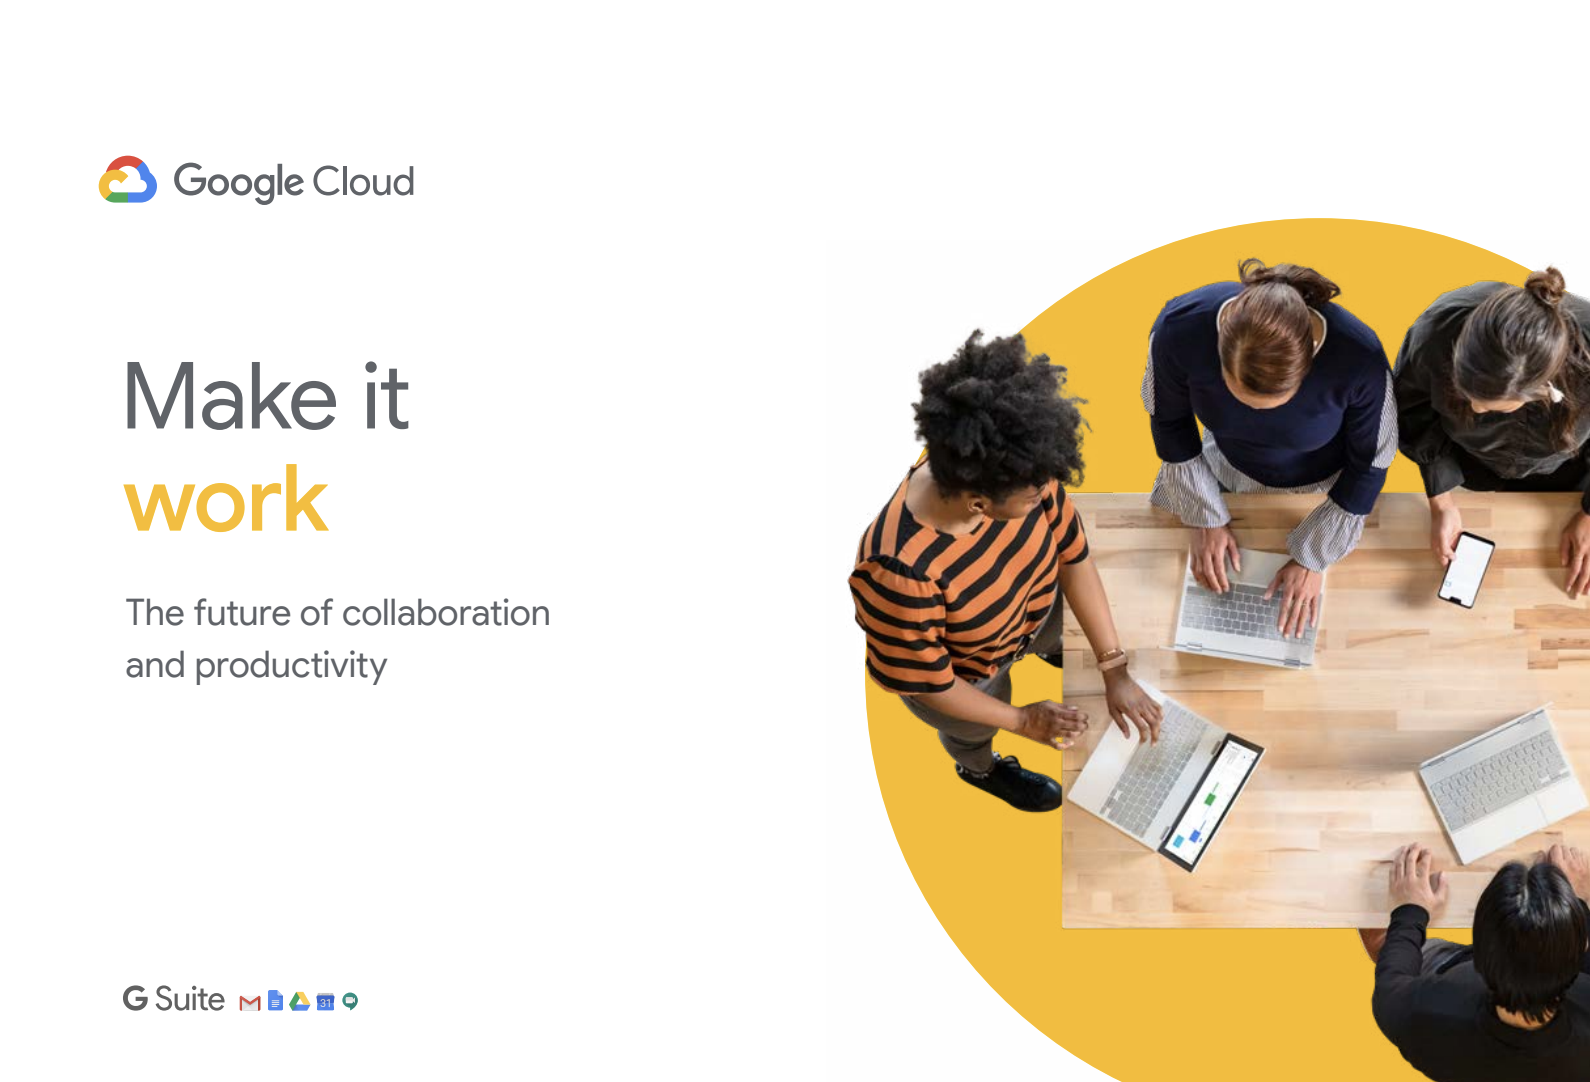 Make it work - The future of collaboration and productivity